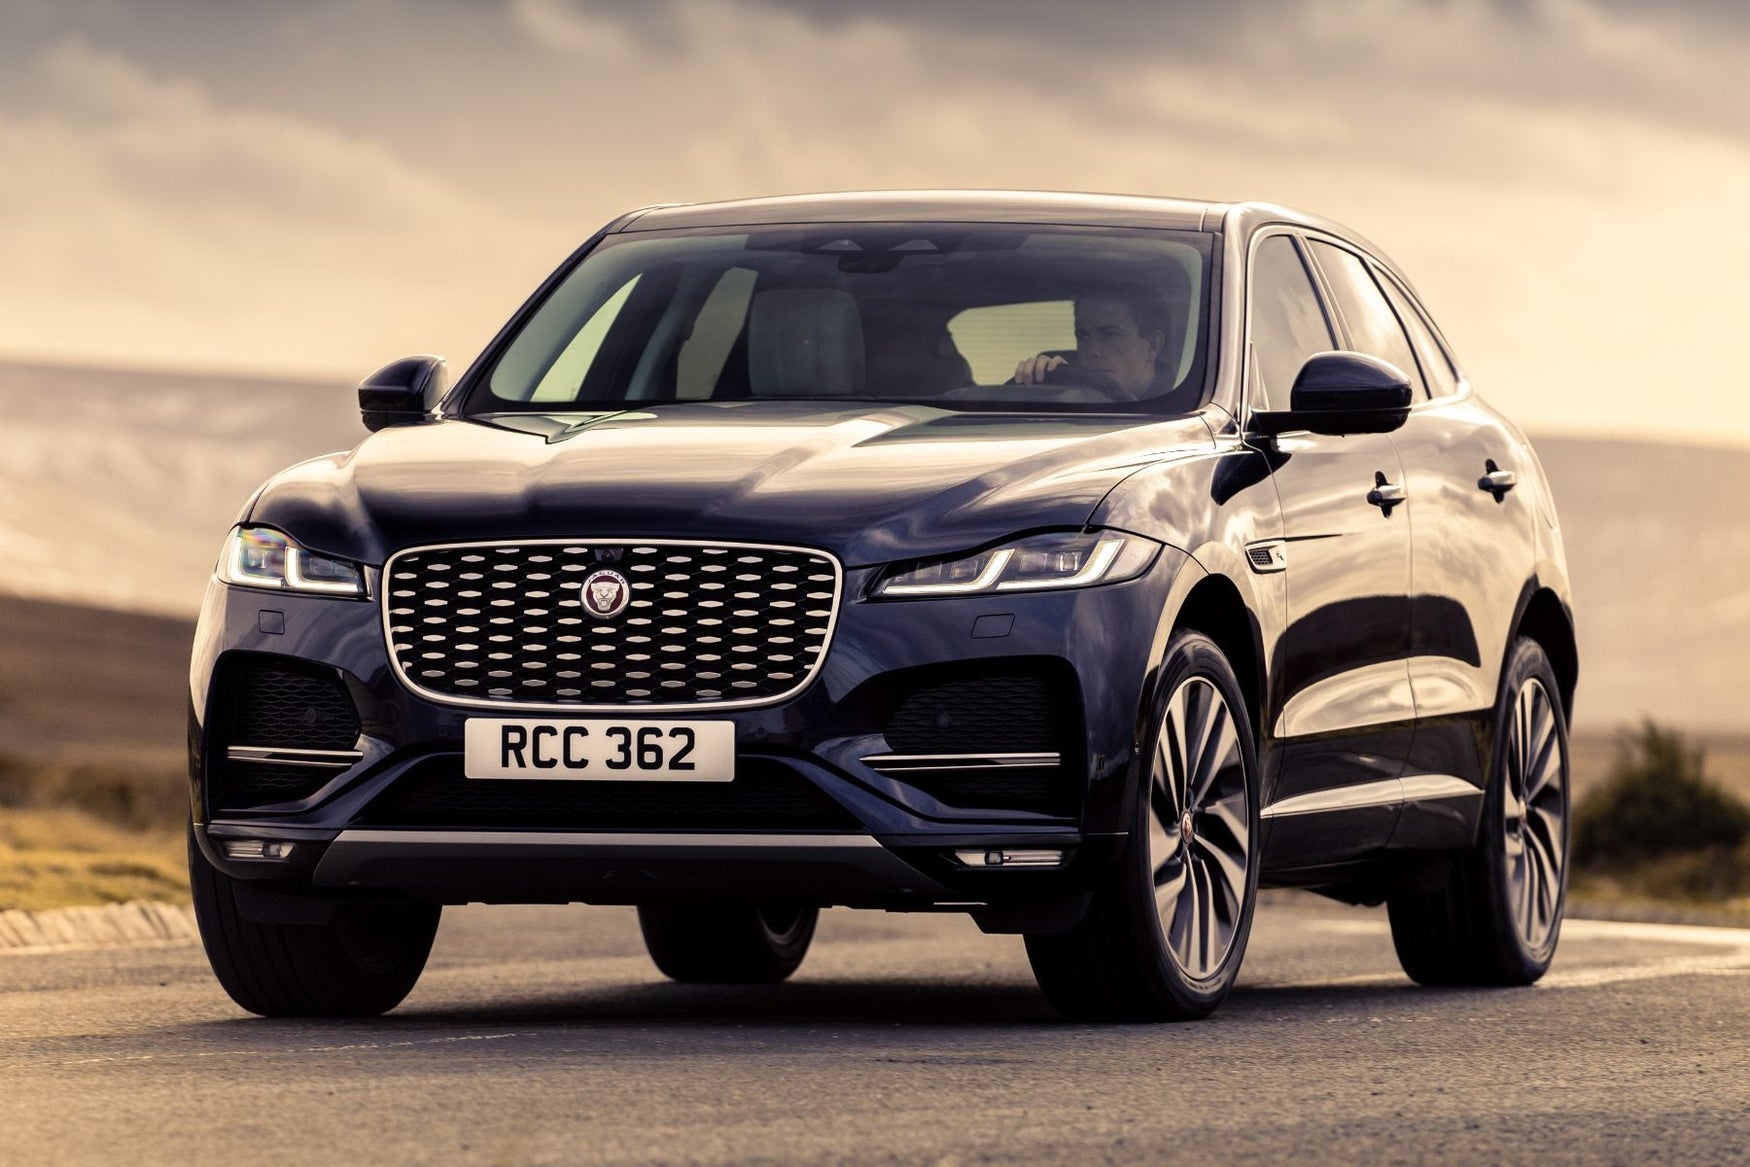 New Jaguar F-Pace revealed: price, specs and release date